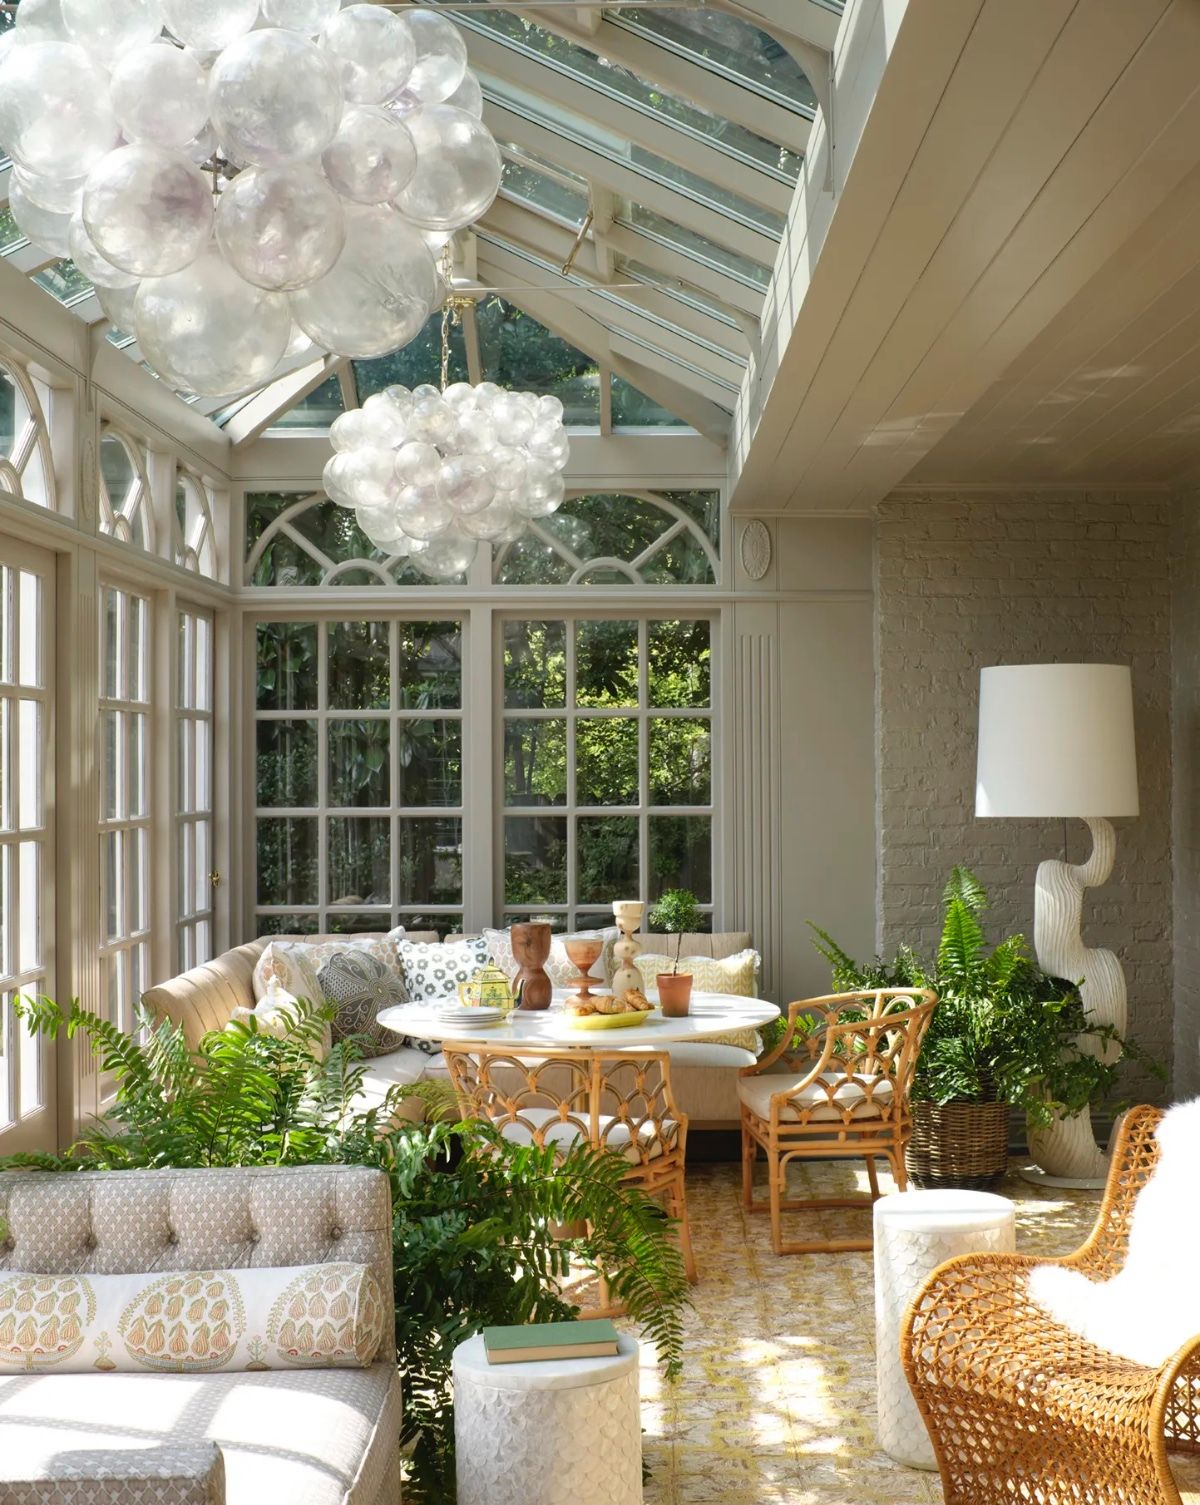 Sunroom: The Indoor Escape You’ll Love to Experience Sunlight Year-Round.